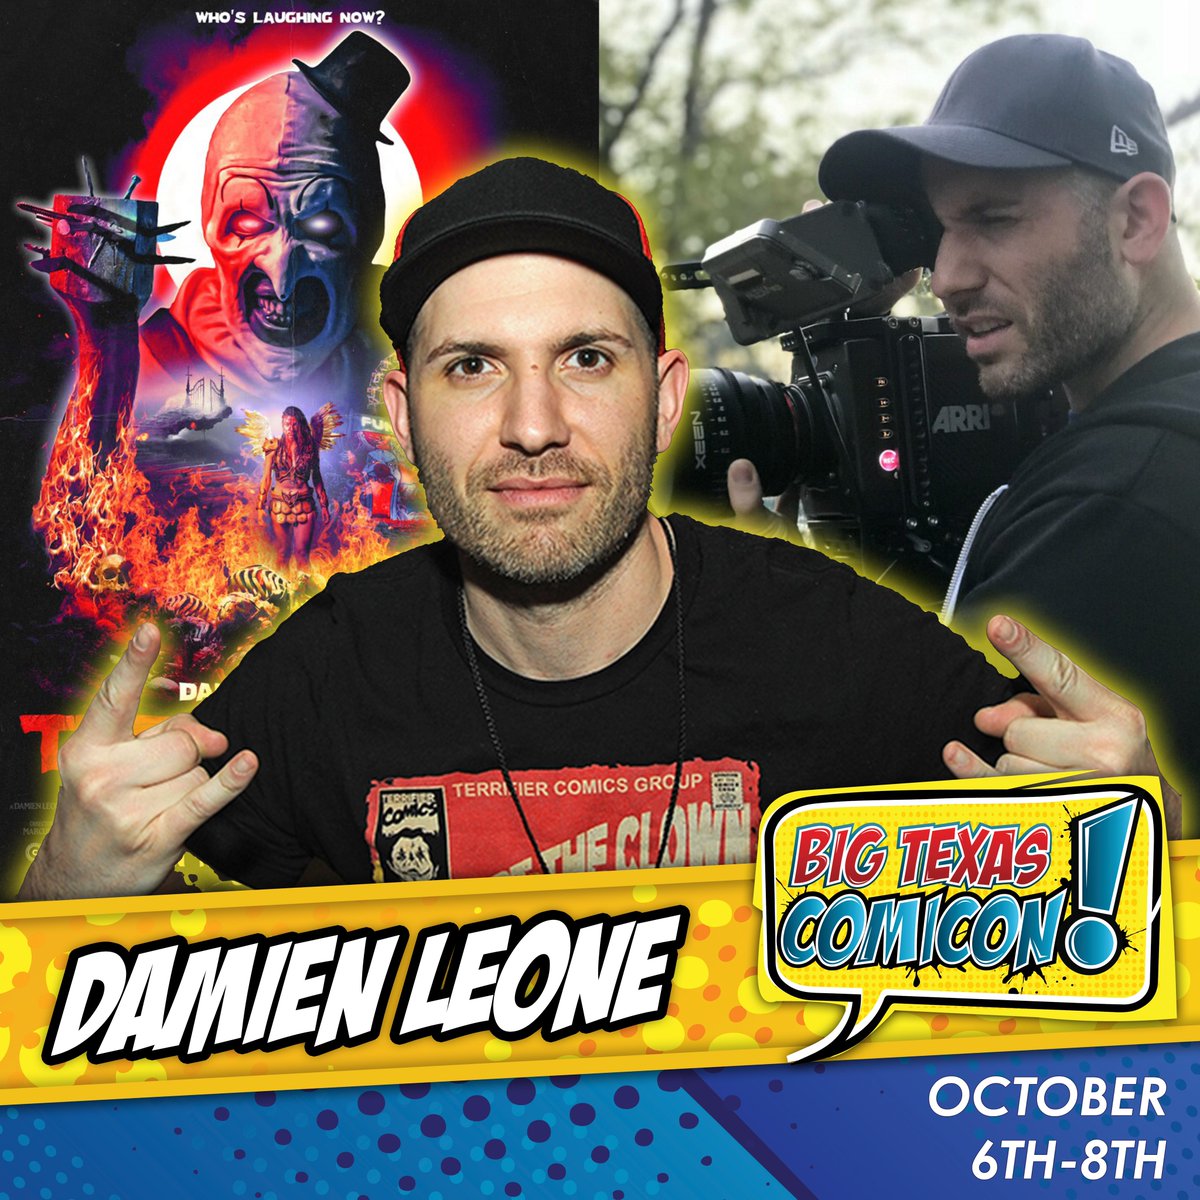 Writer, director, producer of the Terrifier franchise Damien Leone joins us for Big Texas Comicon 2023!

*Art The Clown photo ops on sale this Friday at 12pm!*

bigtexascomicon.com